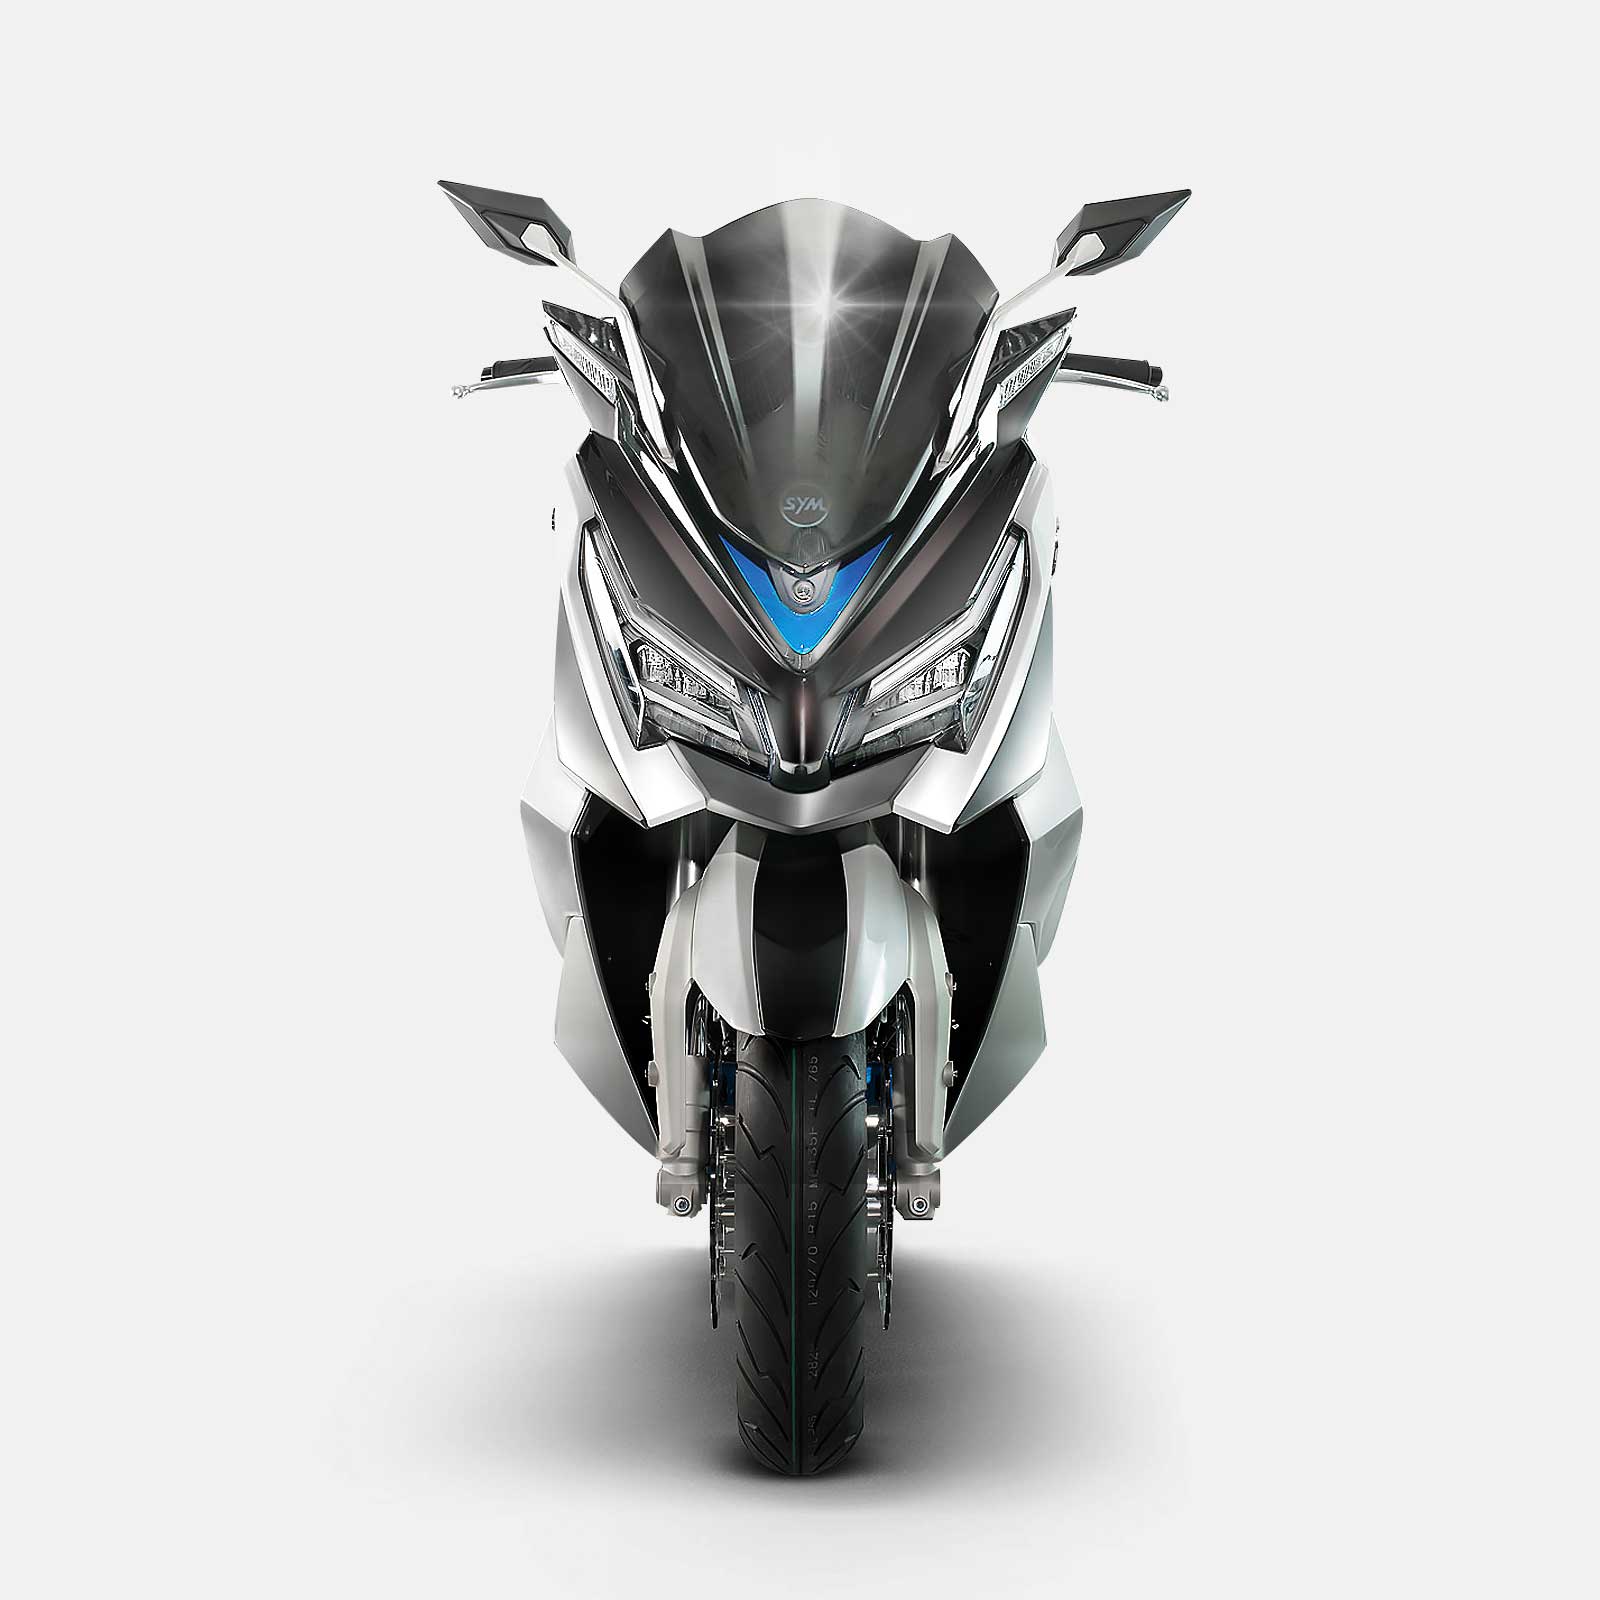 SYM is proud to present the new Maxsym concept at EICMA 2015